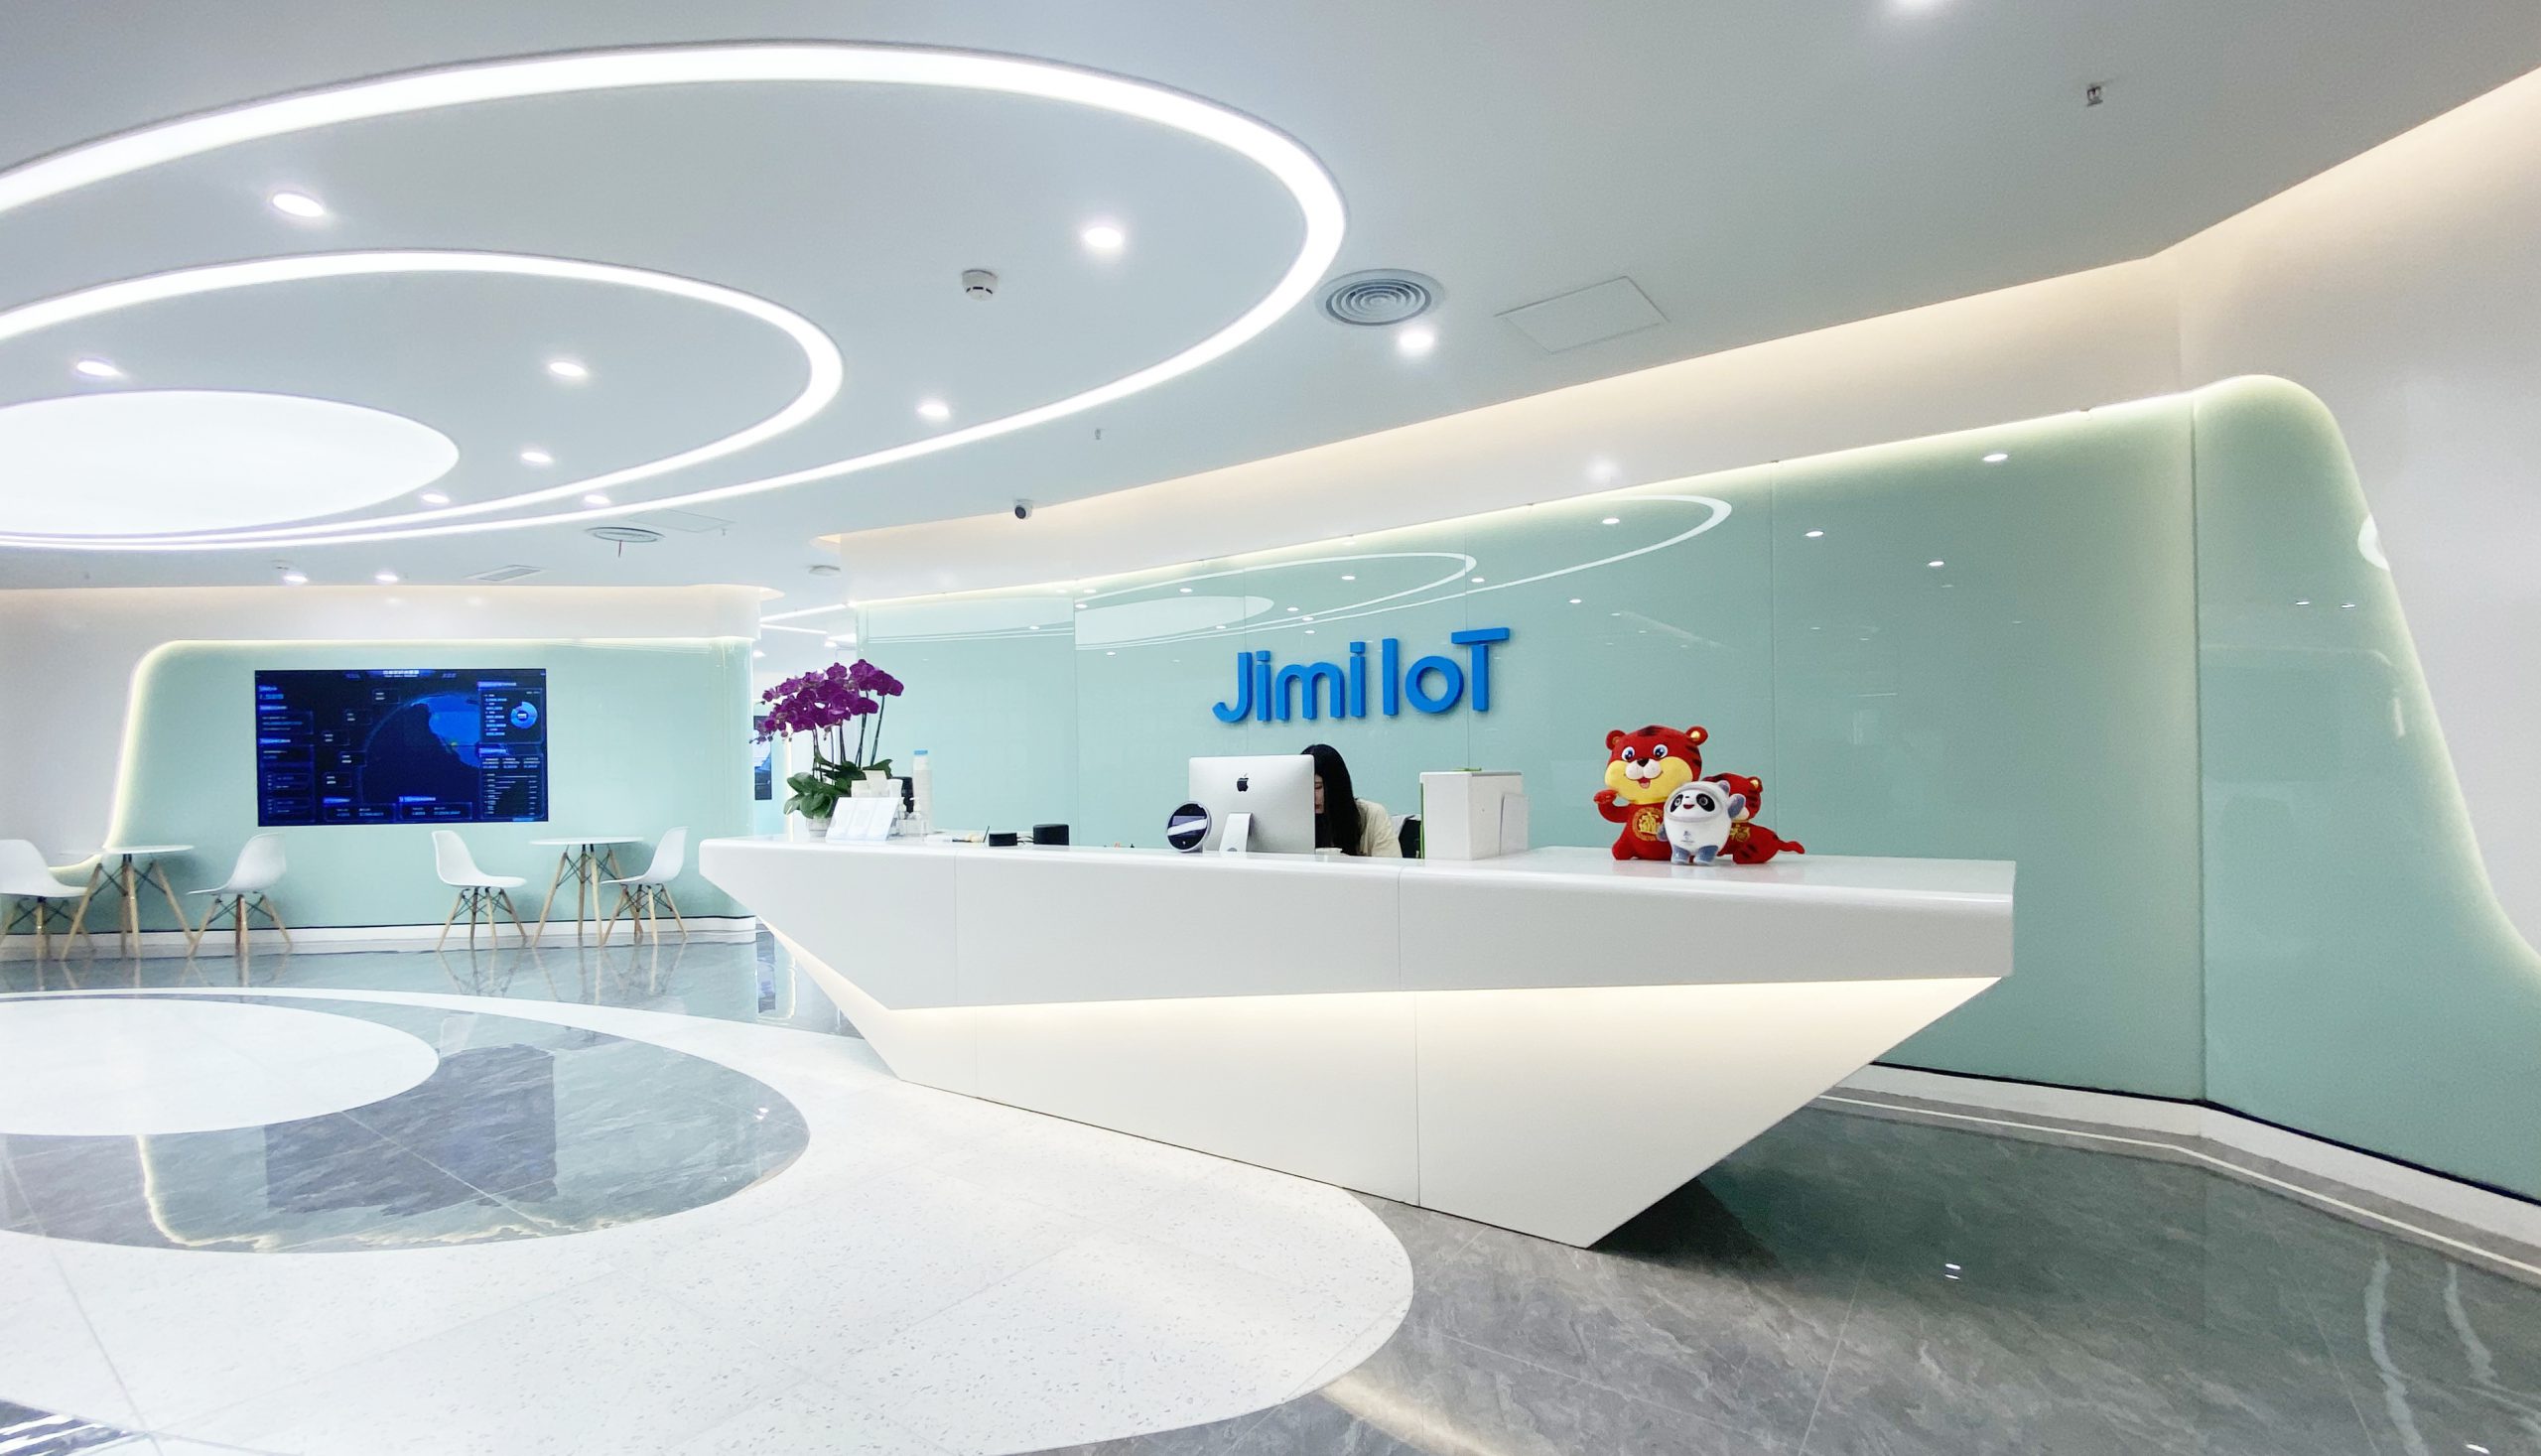 Jimi/Concox Named IoT Industry Leader by World-Leading Market Research Provider Berg Insight